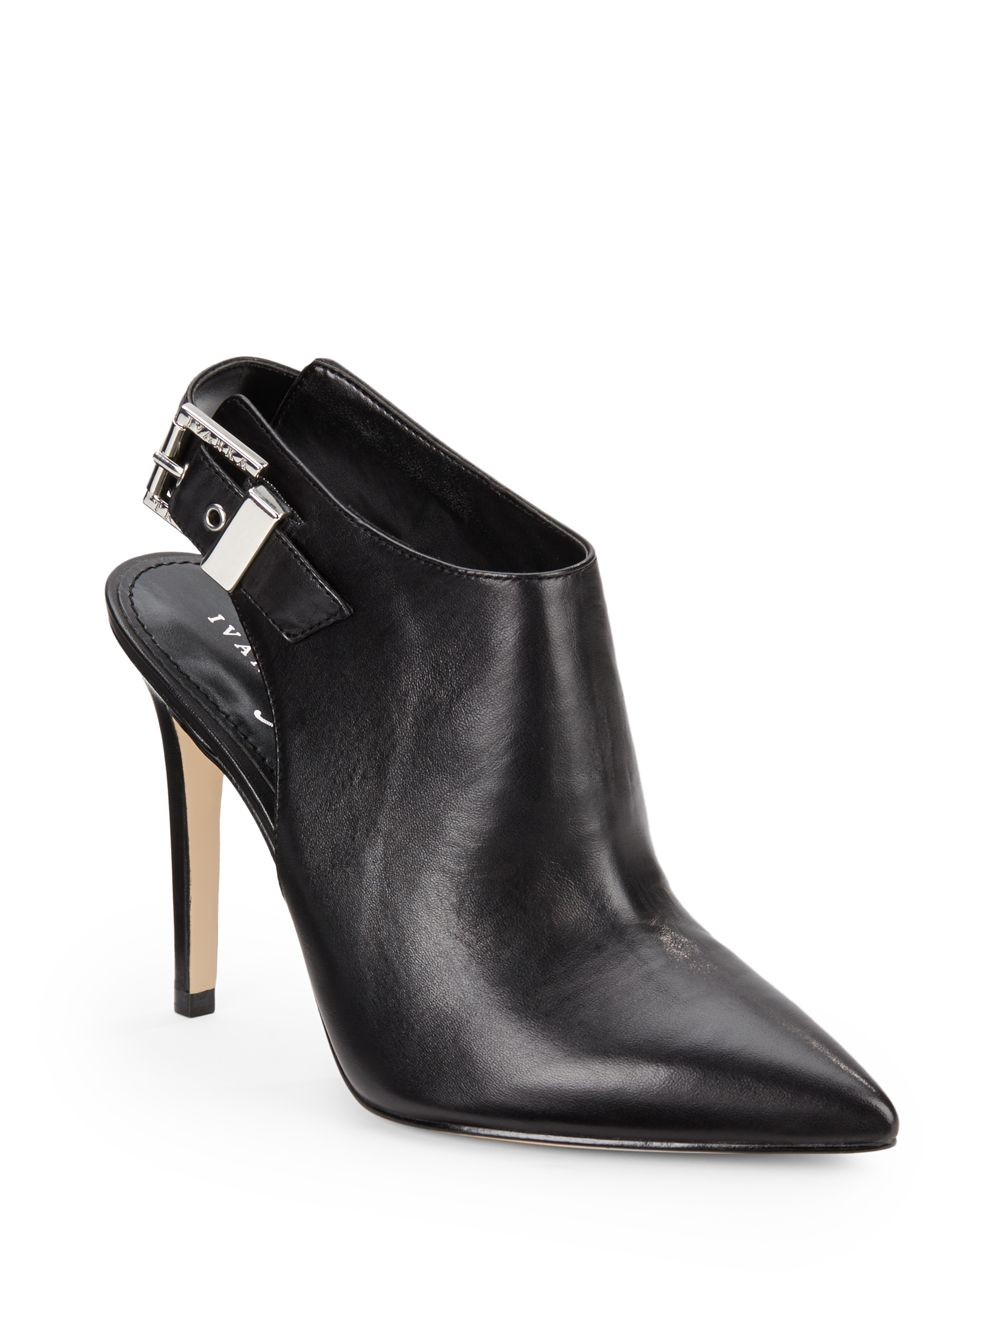 Ivanka trump Sardi Leather Point-Toe Ankle Boots in Black | Lyst